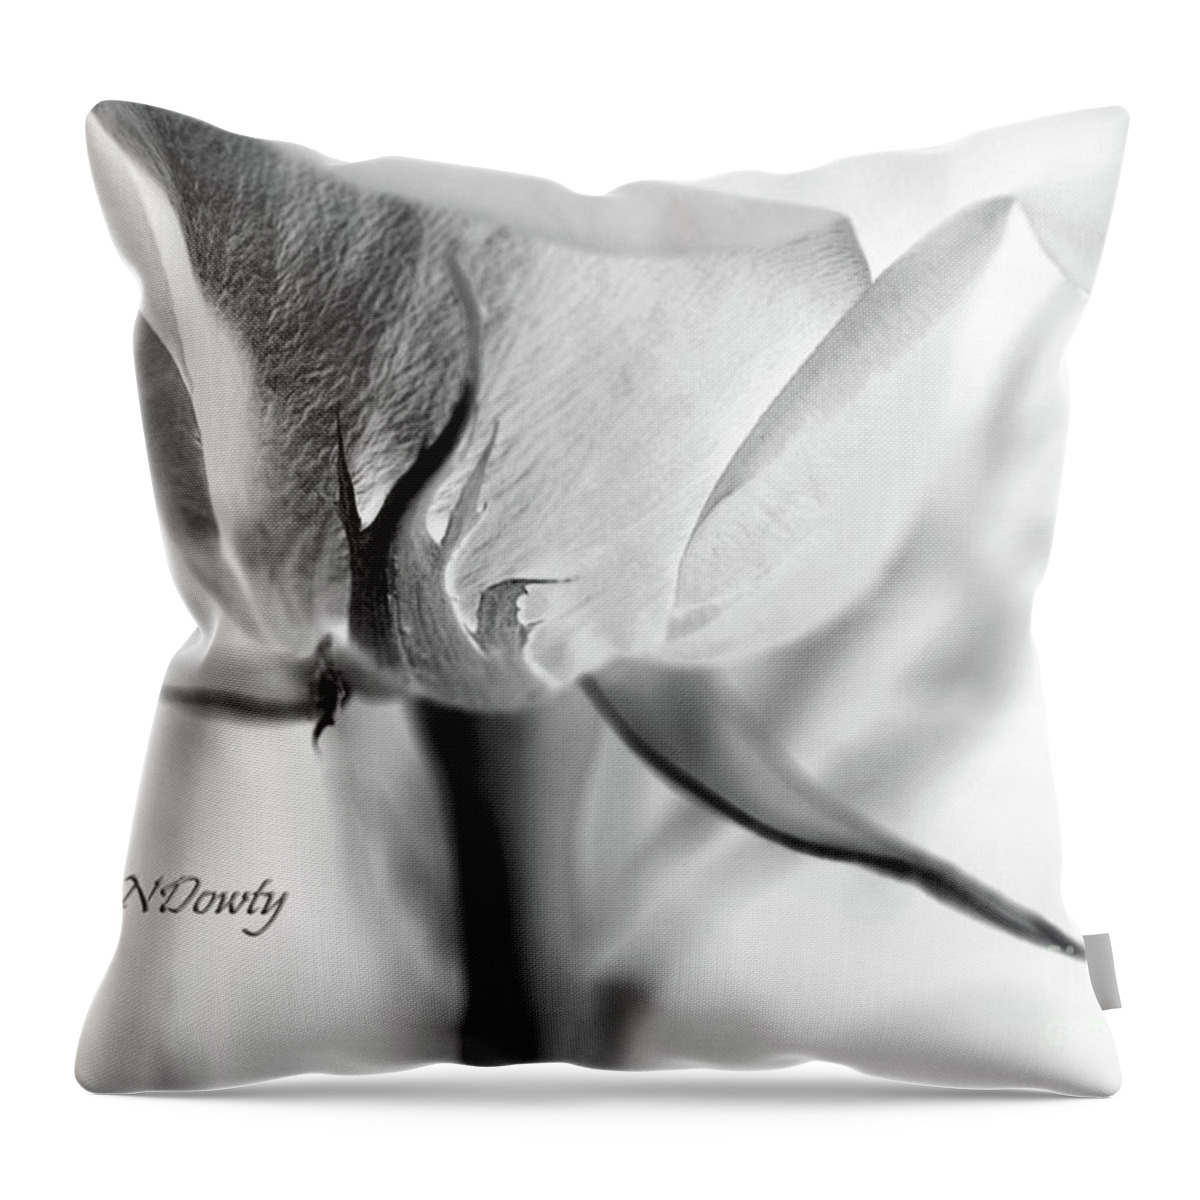 Rose Sepal Bw Throw Pillow featuring the photograph Rose Sepal BW by Natalie Dowty